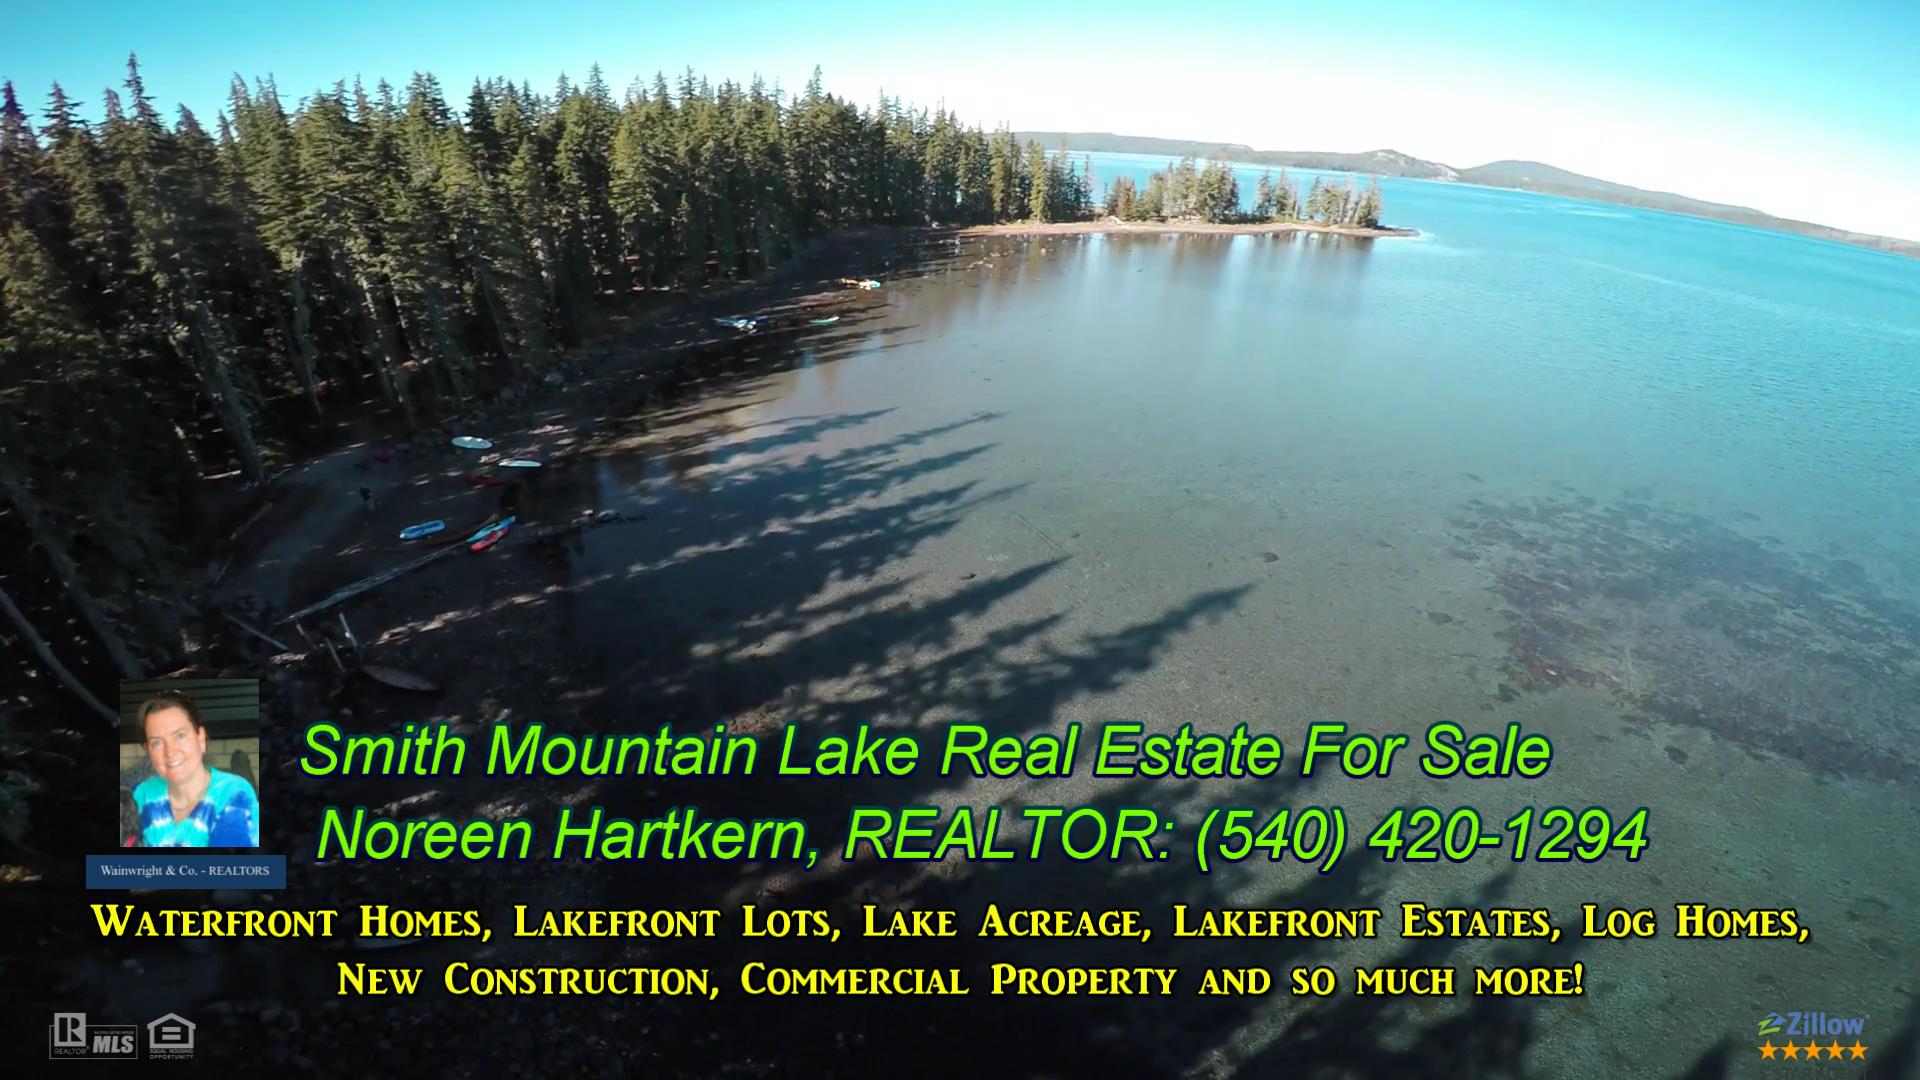 Interested In Purchasing Property at Smith Mountain Lake Virginia? Noreen has Waterfront Homes, Lake Lots, Lakefront Acreage, Estates, Log Homes, New Construction and much, much more! *** Schedule Your FREE Strategy Session Today! Call or Text NOW 540-420-1294 ***